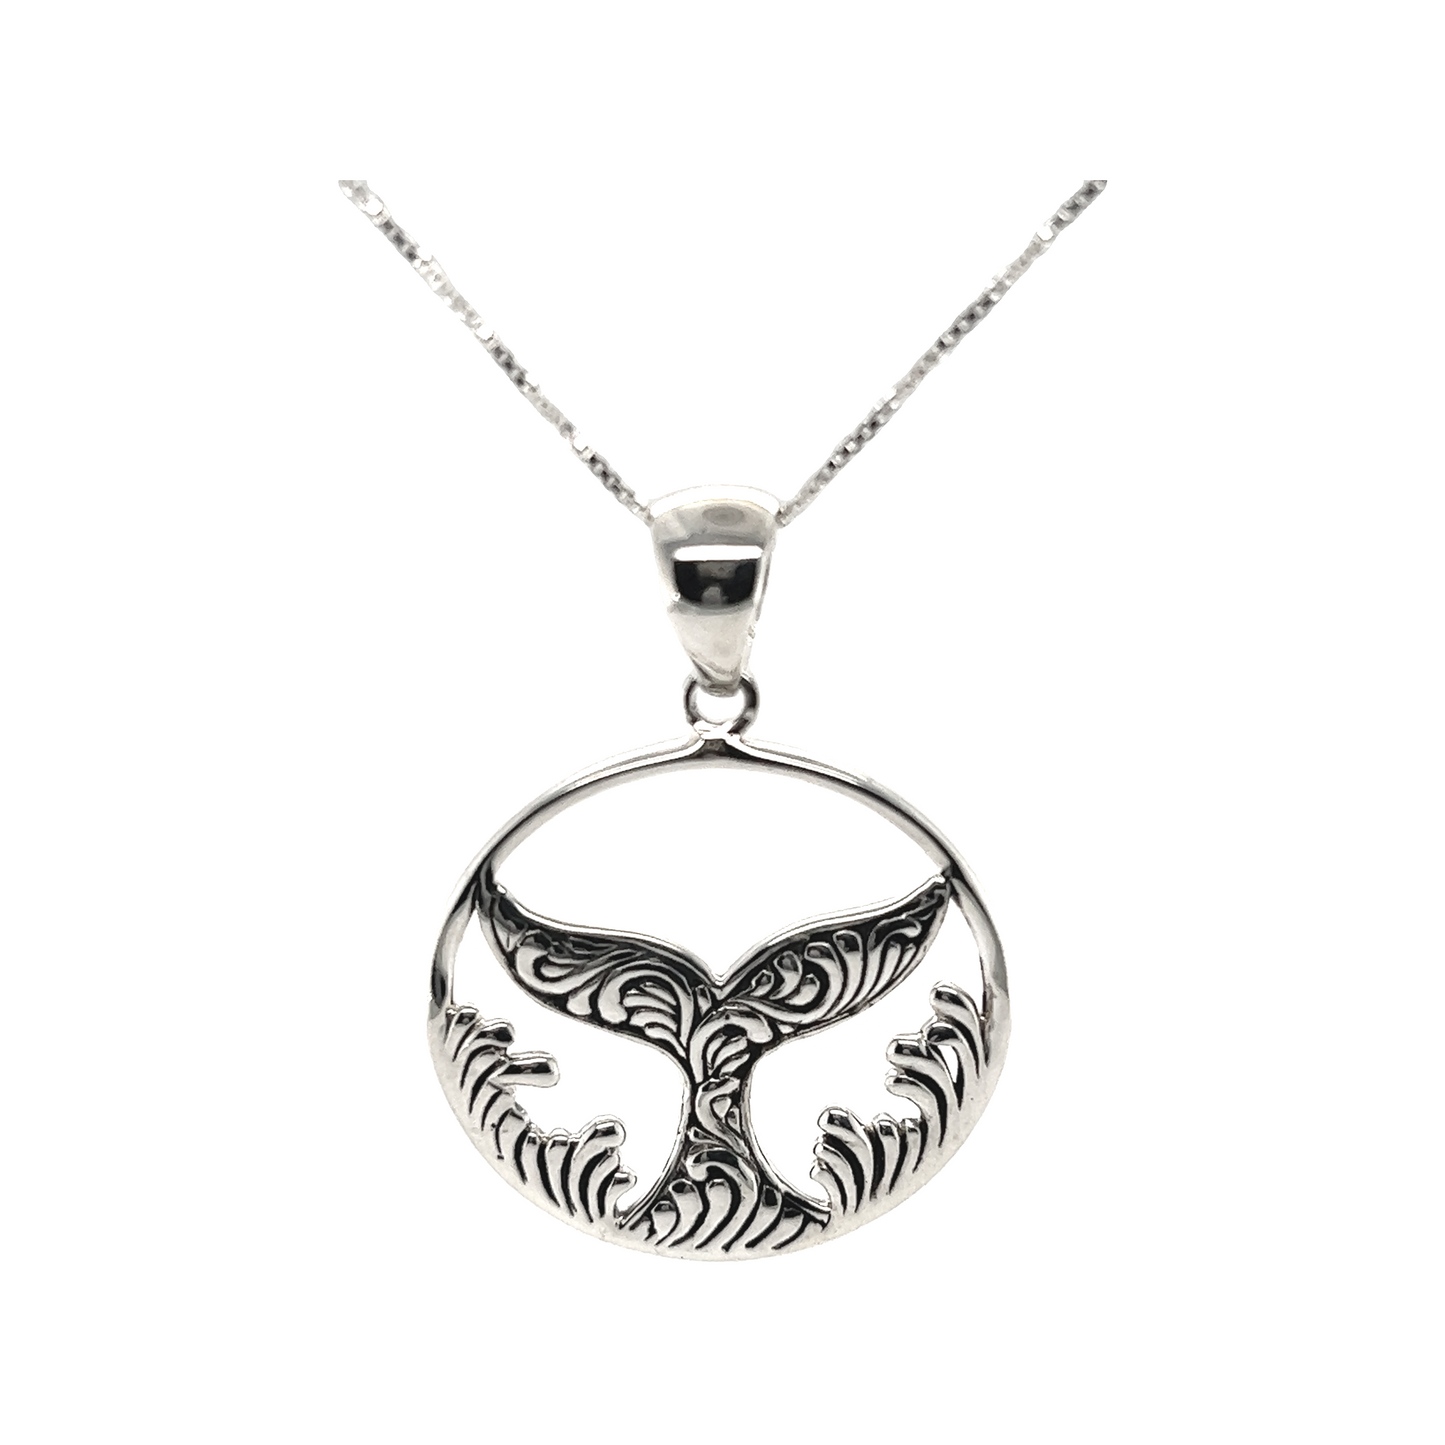 A Dazzling Circular Whale Tail pendant with a whale tail, inspired by the ocean, made by Super Silver.